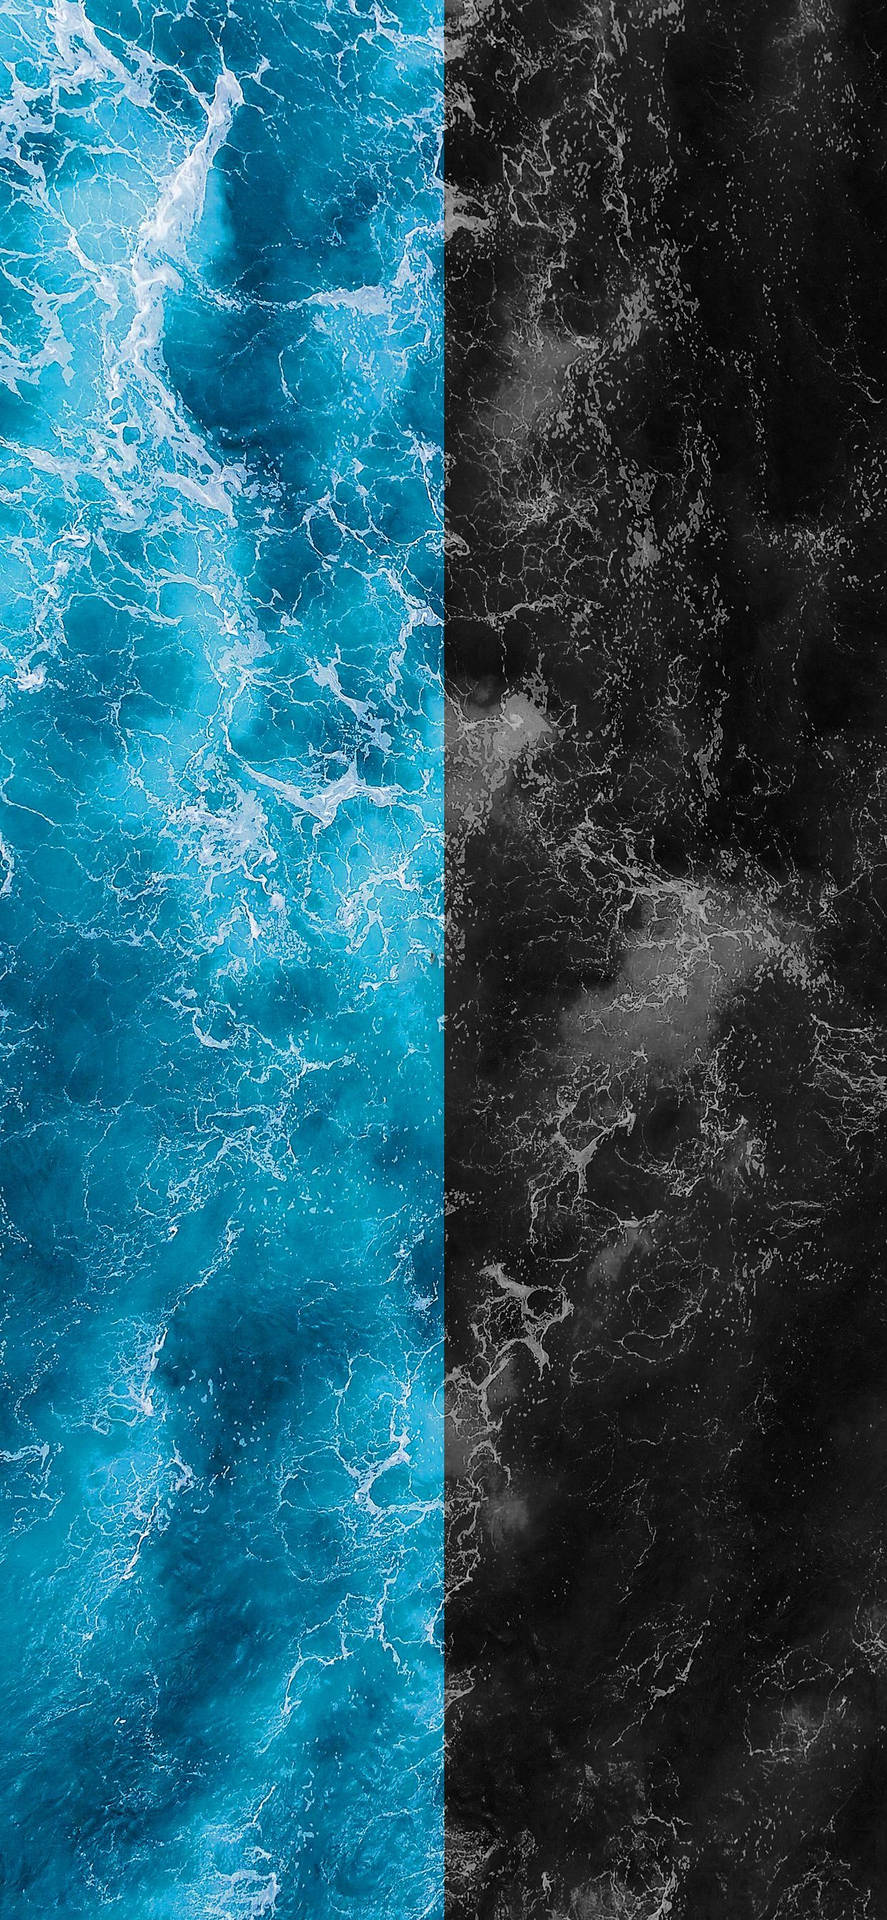 A Split Of Blue And Black Oceans